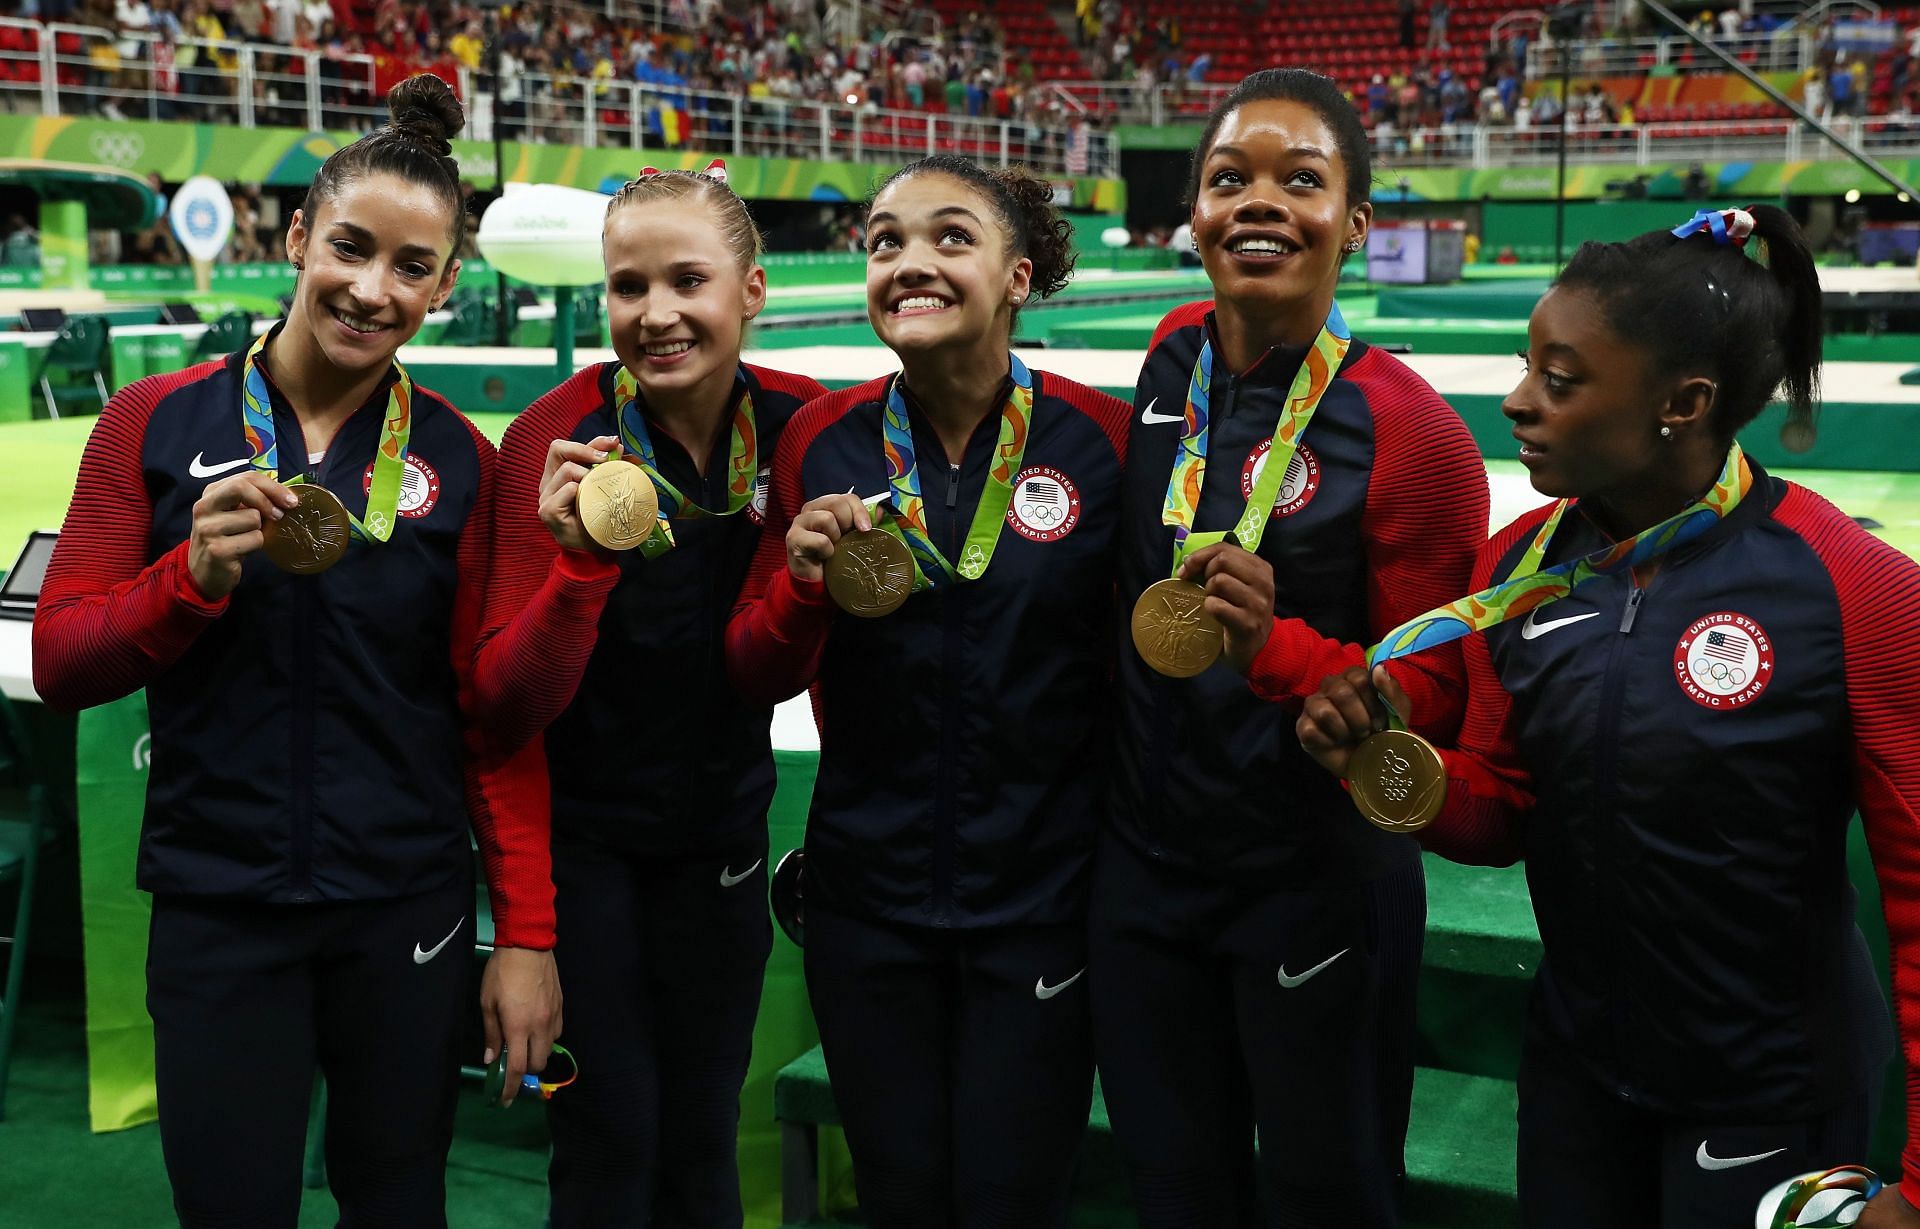 Raisman and her Final Five team at the Rio Olympics: Day 4